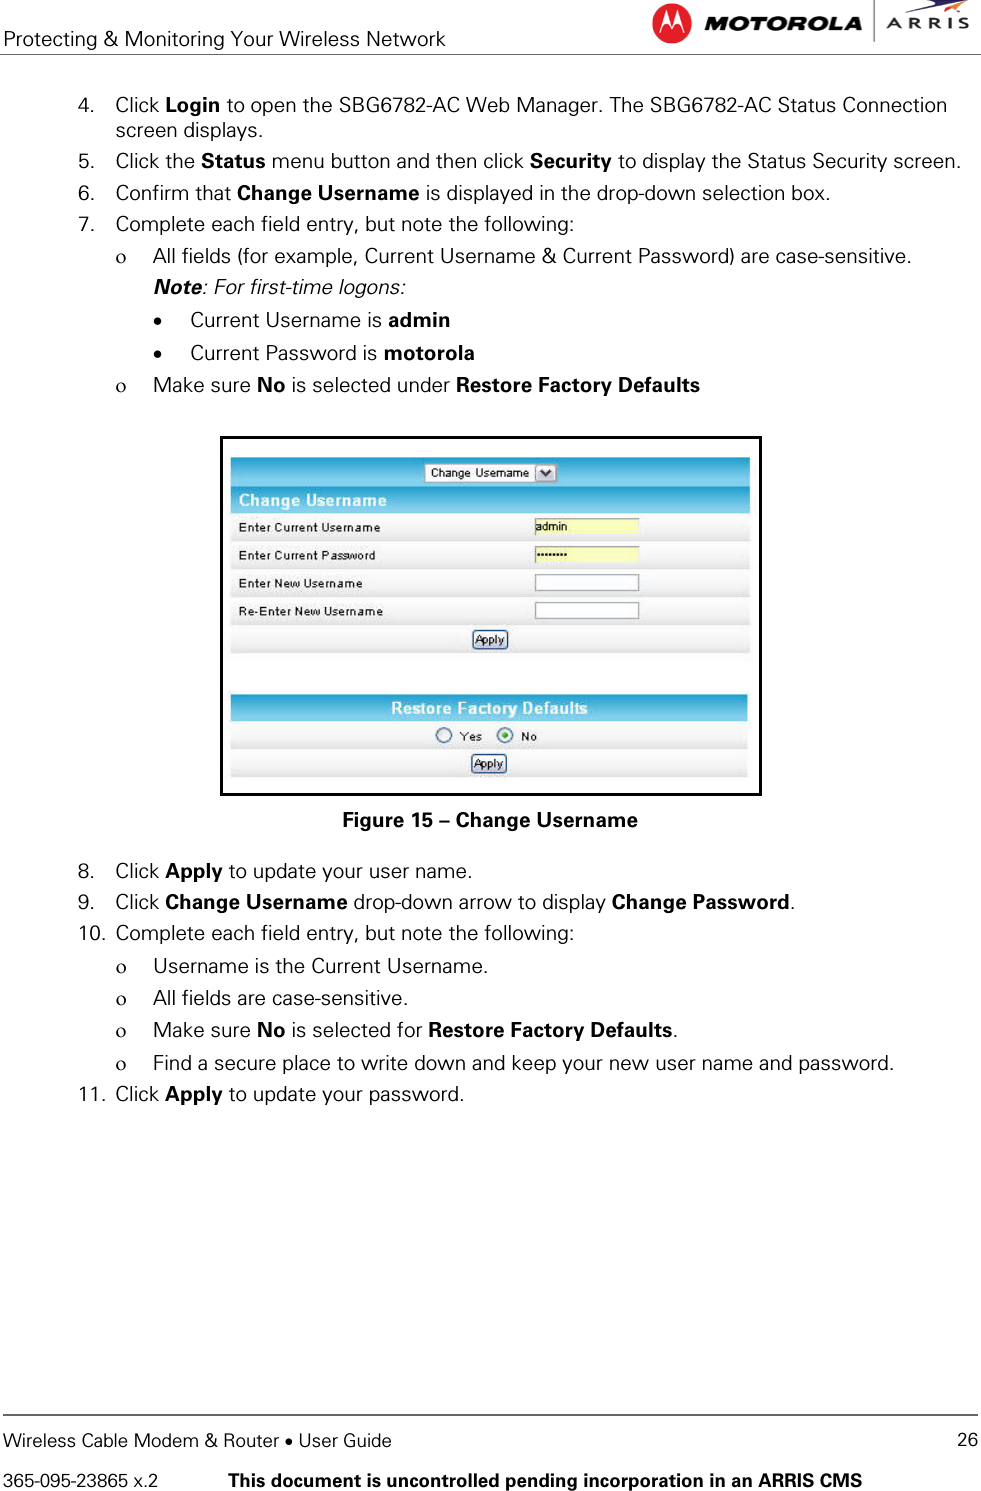 Protecting &amp; Monitoring Your Wireless Network   Wireless Cable Modem &amp; Router • User Guide 26 365-095-23865 x.2   This document is uncontrolled pending incorporation in an ARRIS CMS  4. Click Login to open the SBG6782-AC Web Manager. The SBG6782-AC Status Connection screen displays. 5. Click the Status menu button and then click Security to display the Status Security screen. 6. Confirm that Change Username is displayed in the drop-down selection box. 7. Complete each field entry, but note the following: ο All fields (for example, Current Username &amp; Current Password) are case-sensitive. Note: For first-time logons: • Current Username is admin • Current Password is motorola ο Make sure No is selected under Restore Factory Defaults  Figure 15 – Change Username 8. Click Apply to update your user name. 9. Click Change Username drop-down arrow to display Change Password. 10. Complete each field entry, but note the following: ο Username is the Current Username. ο All fields are case-sensitive. ο Make sure No is selected for Restore Factory Defaults. ο Find a secure place to write down and keep your new user name and password. 11. Click Apply to update your password. 